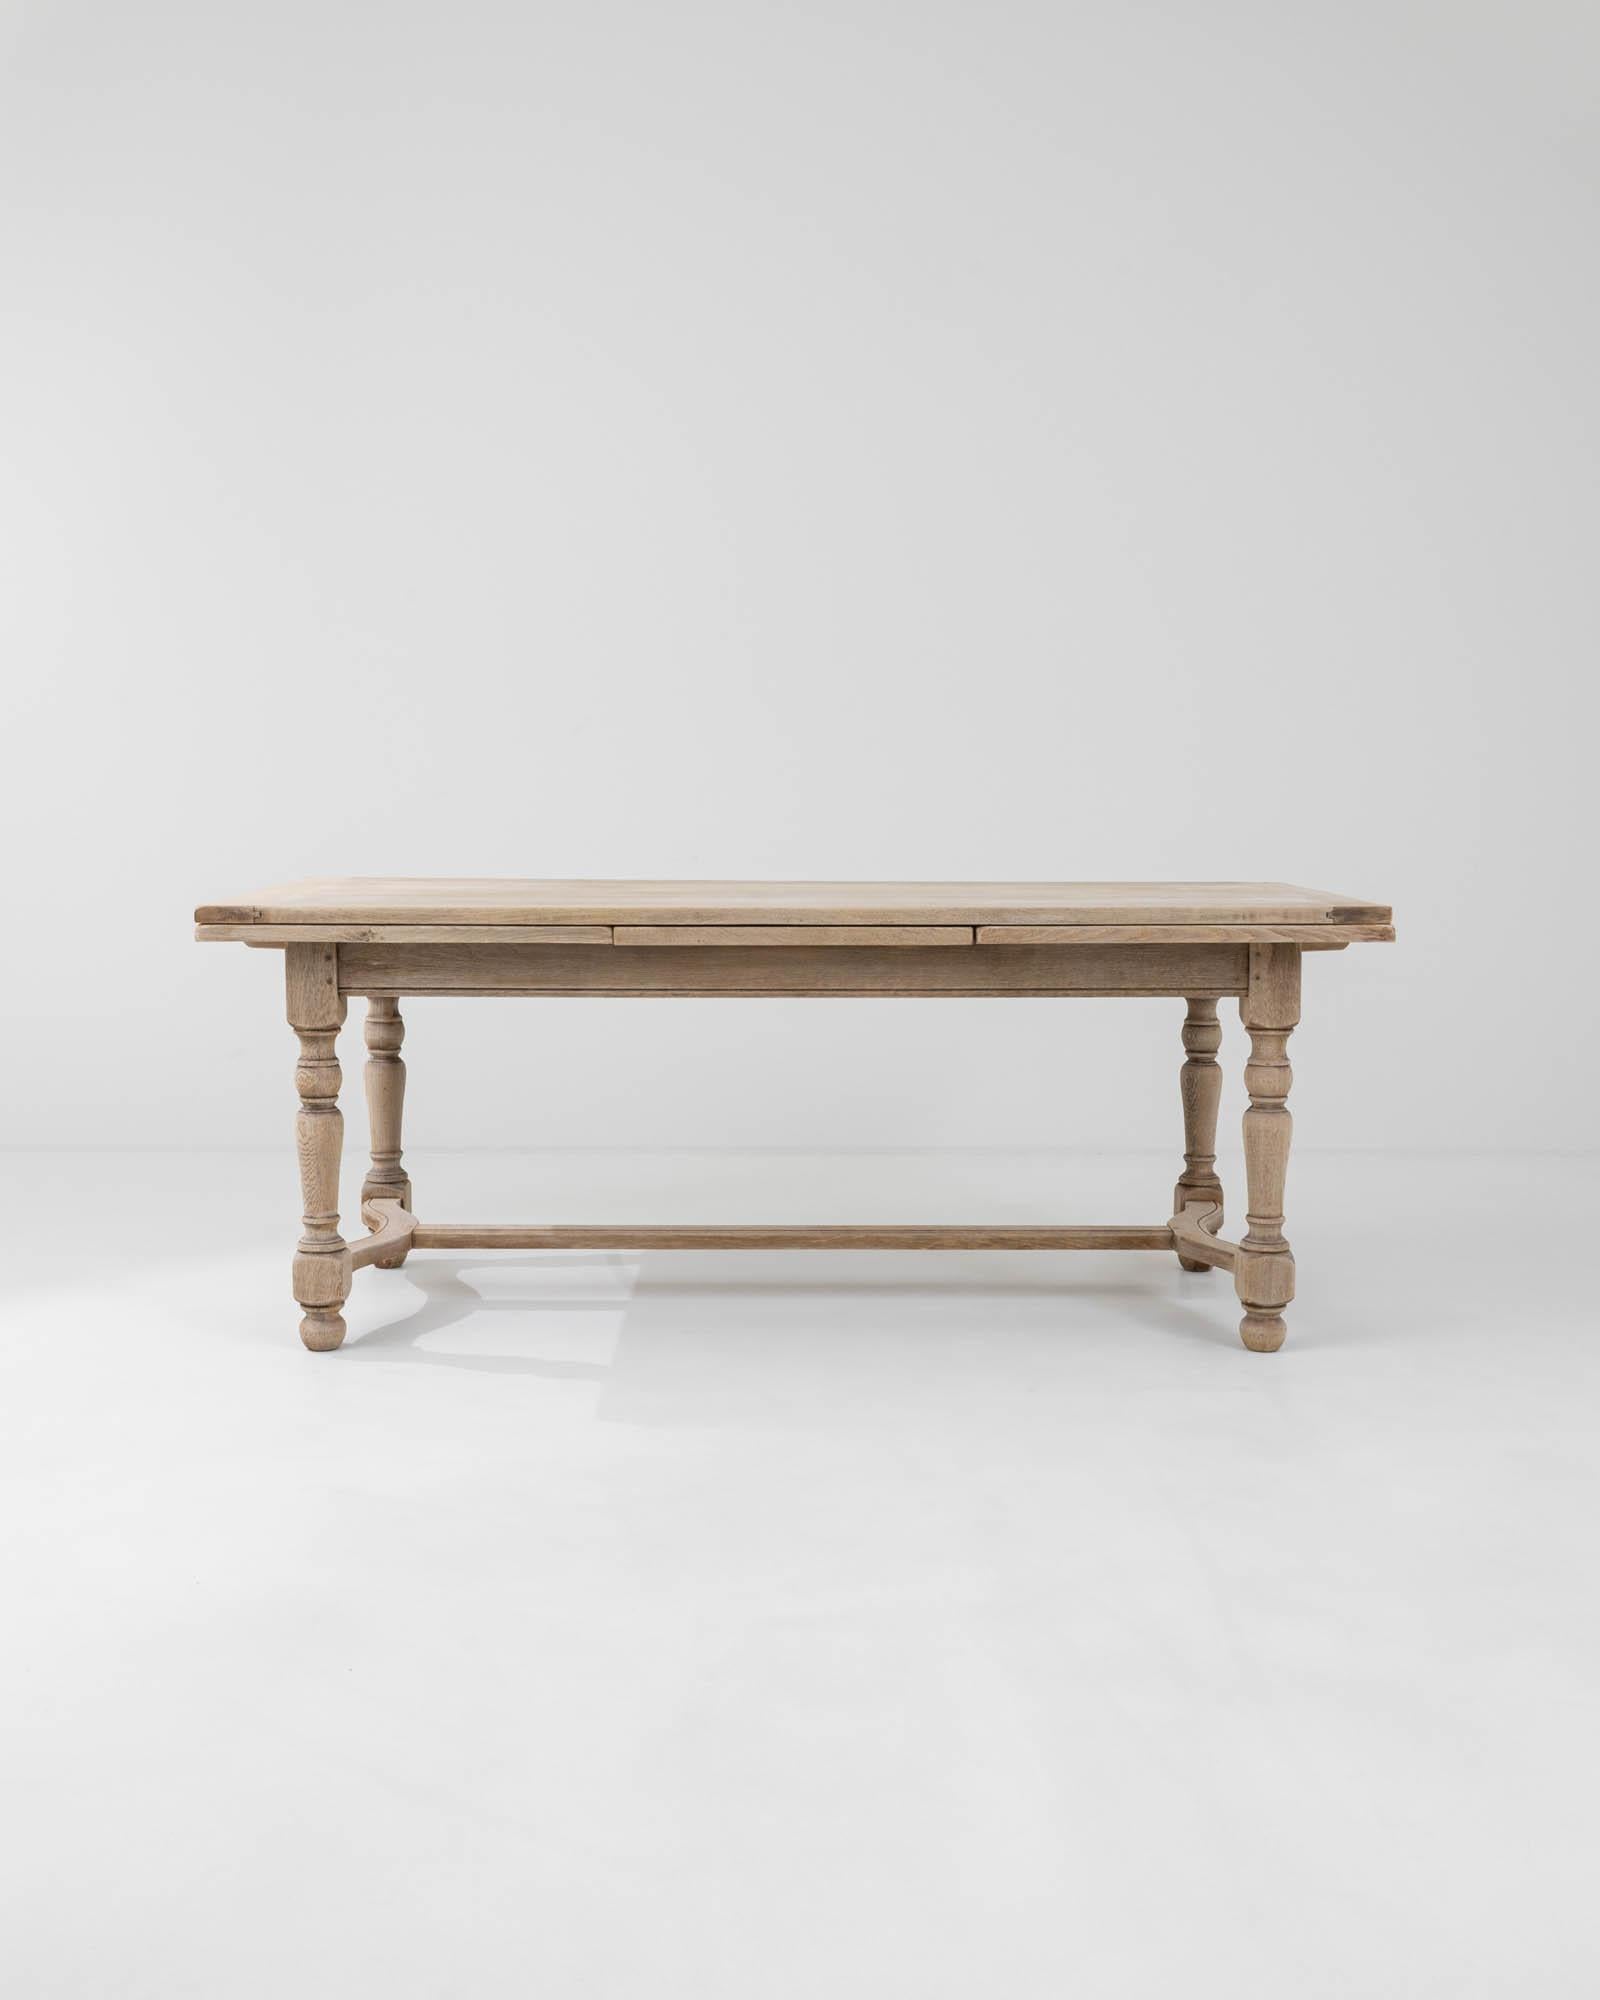 A simple country design in natural oak gives this vintage dining table a timeless charm. Hand-built in Belgium in the 20th century, turned legs create an attractive profile, while the sinuous curve of the lower struts brings elegance to the